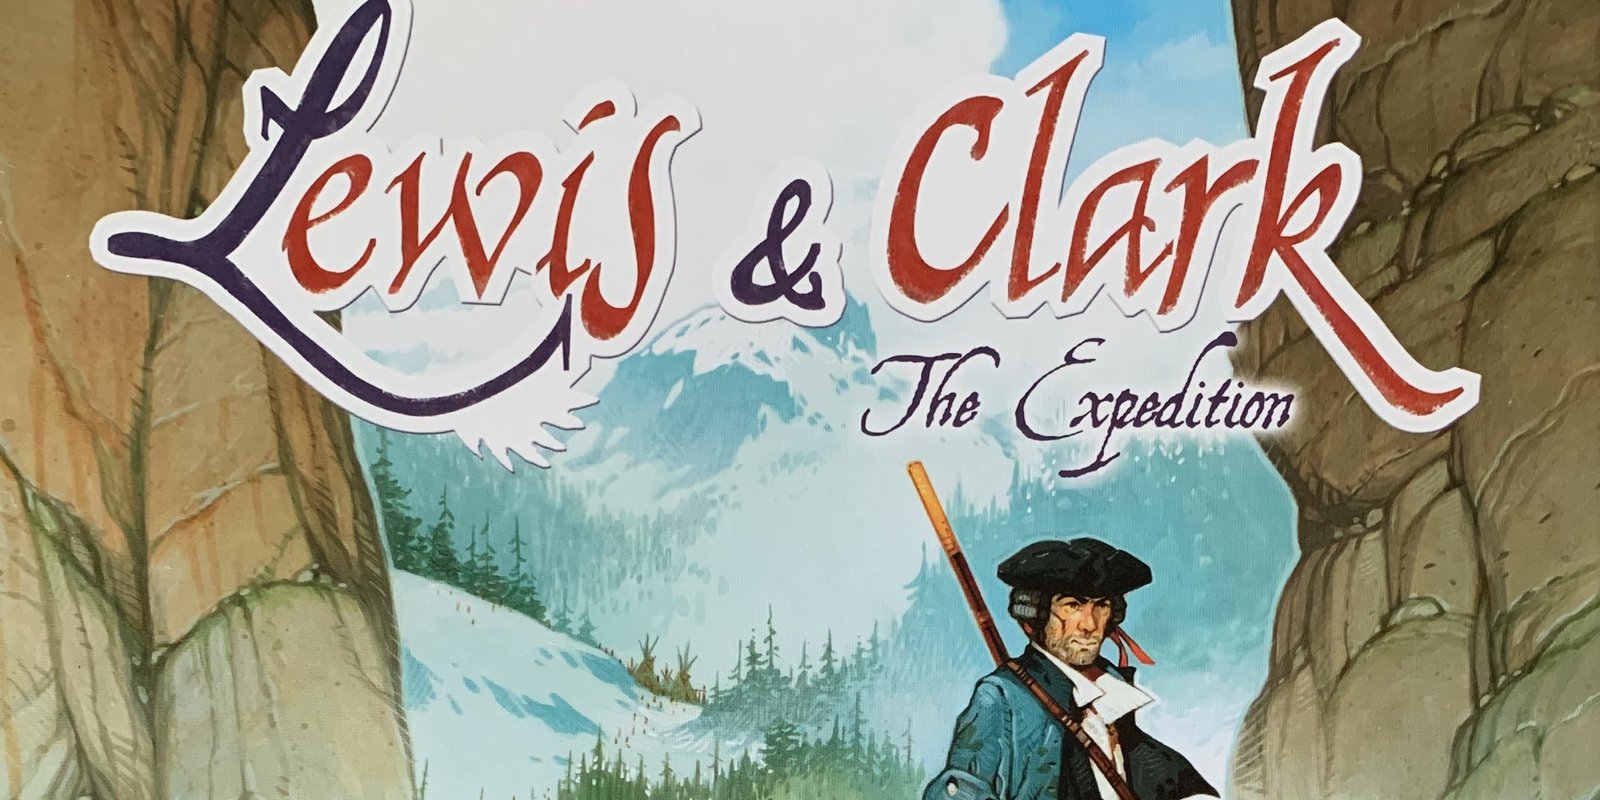 Lewis & clark the expedition